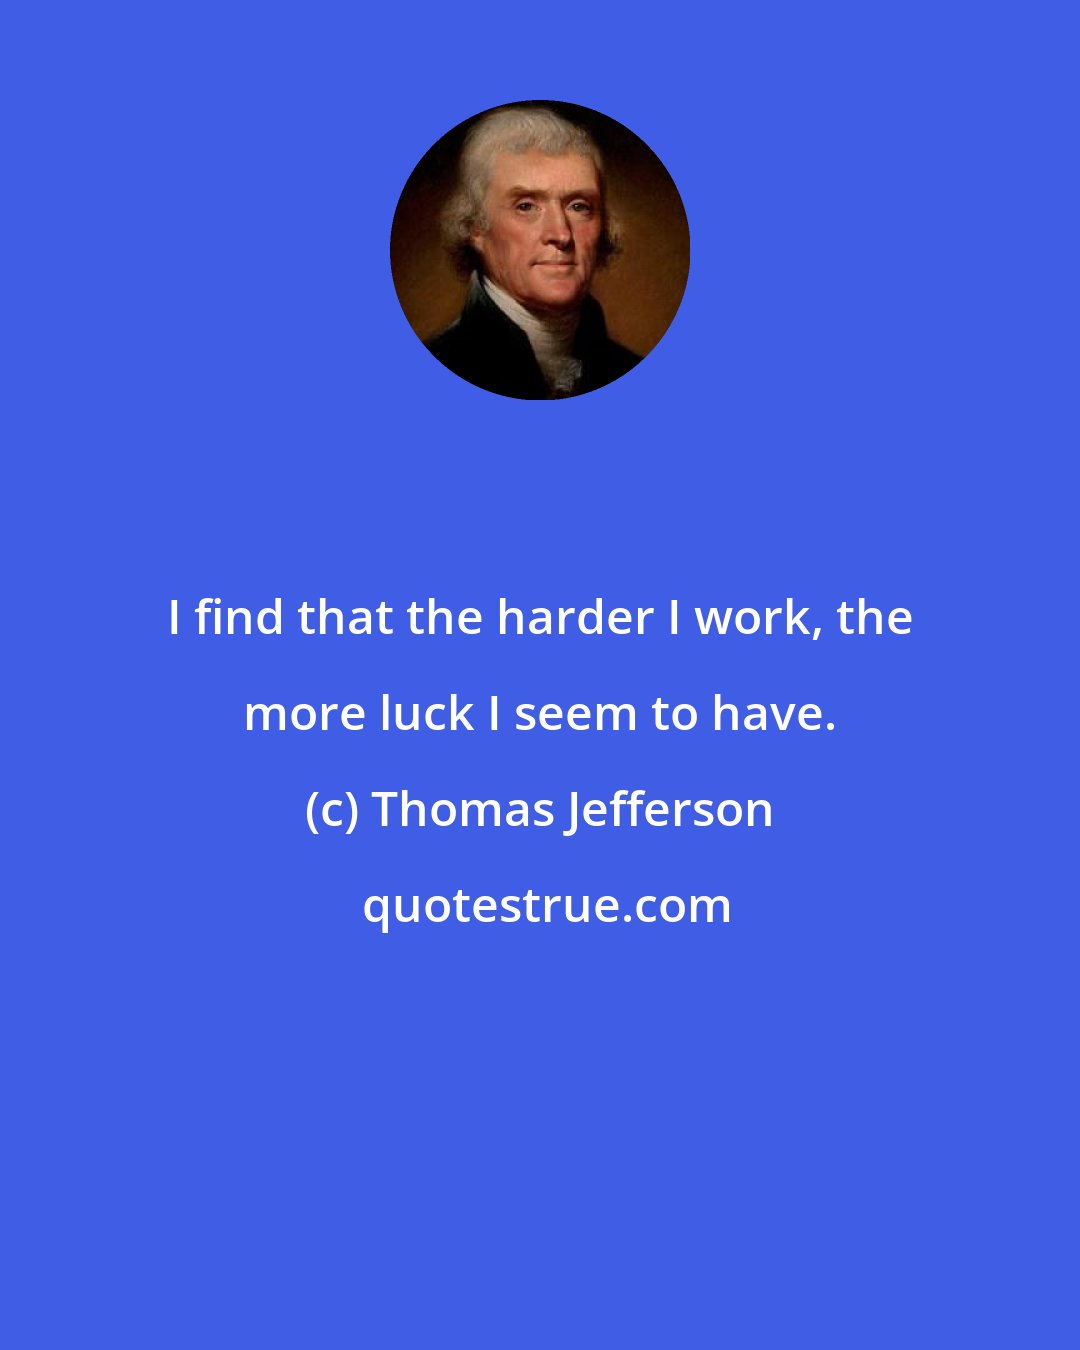 Thomas Jefferson: I find that the harder I work, the more luck I seem to have.